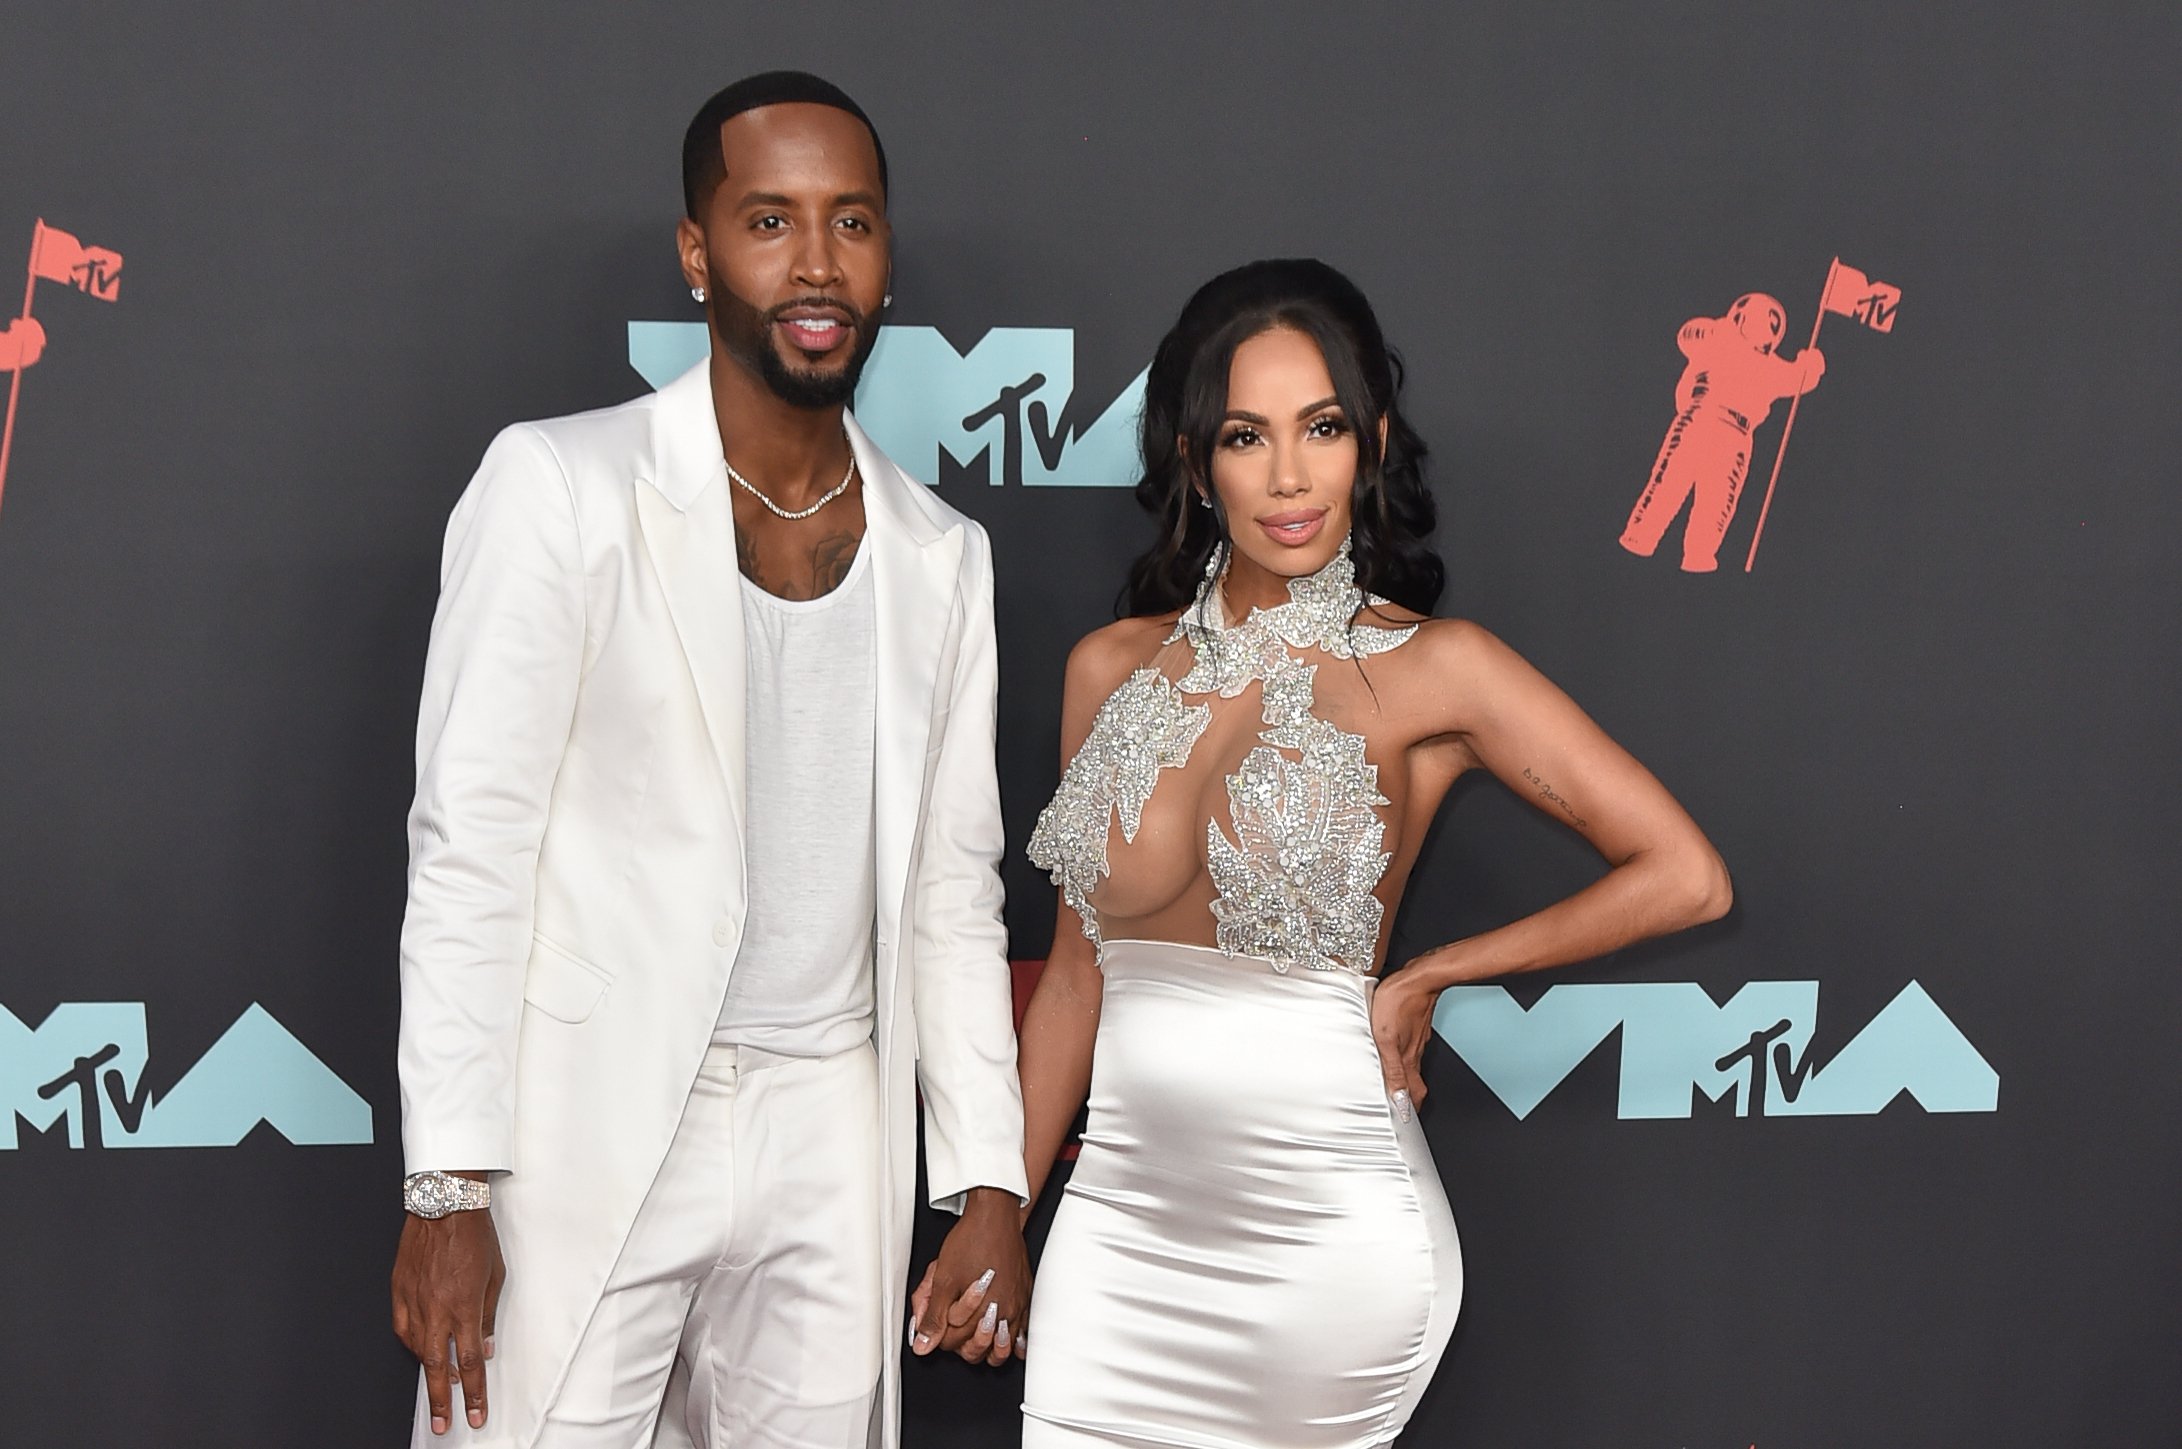 Safaree Samuels and Erica Mena attend the 2019 MTV Video Music Awards at Prudential Center on August 26, 2019 in Newark, New Jersey. | Photo: Getty Images